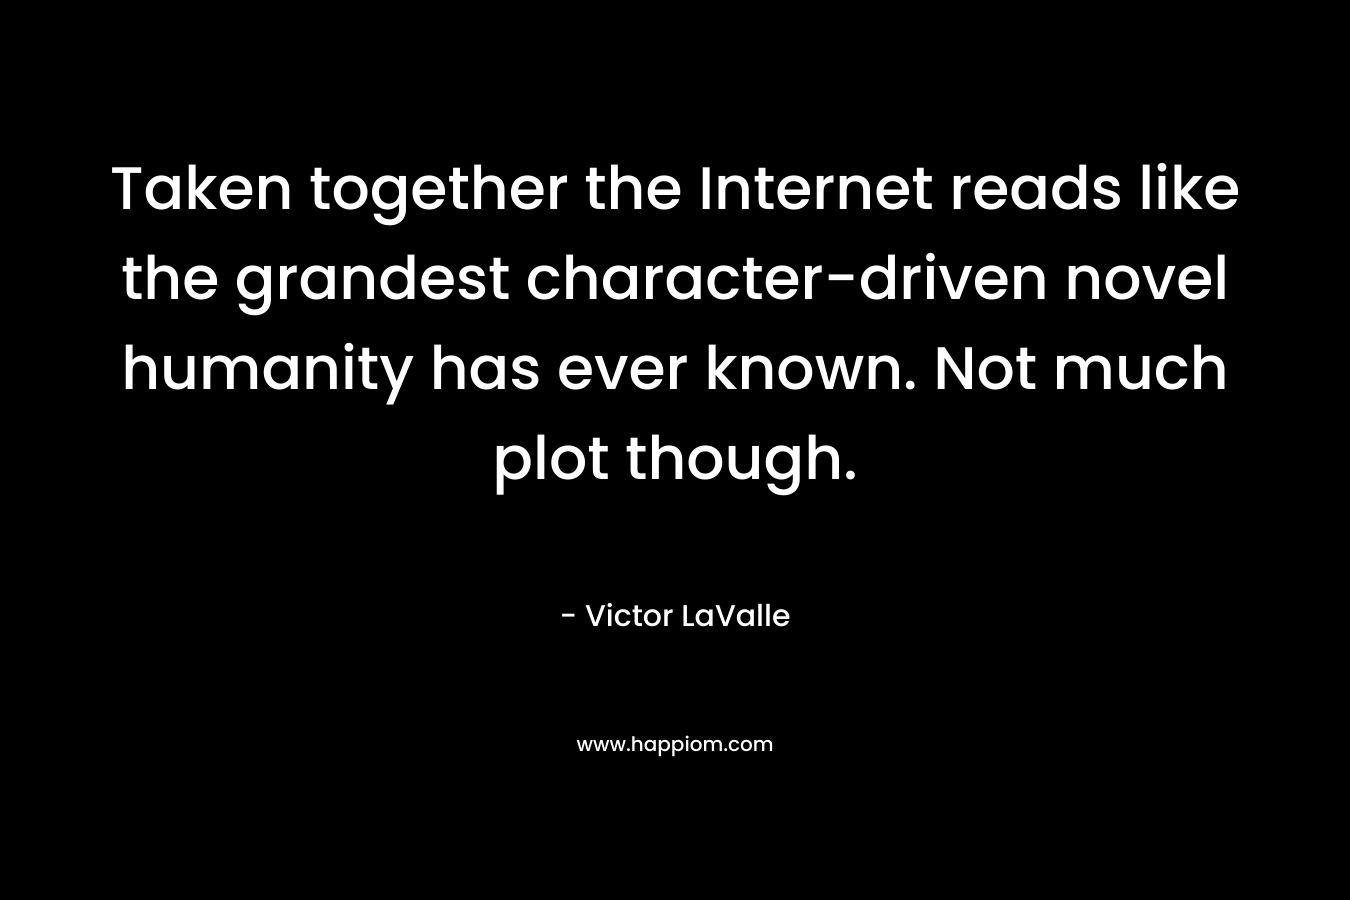 Taken together the Internet reads like the grandest character-driven novel humanity has ever known. Not much plot though. – Victor LaValle